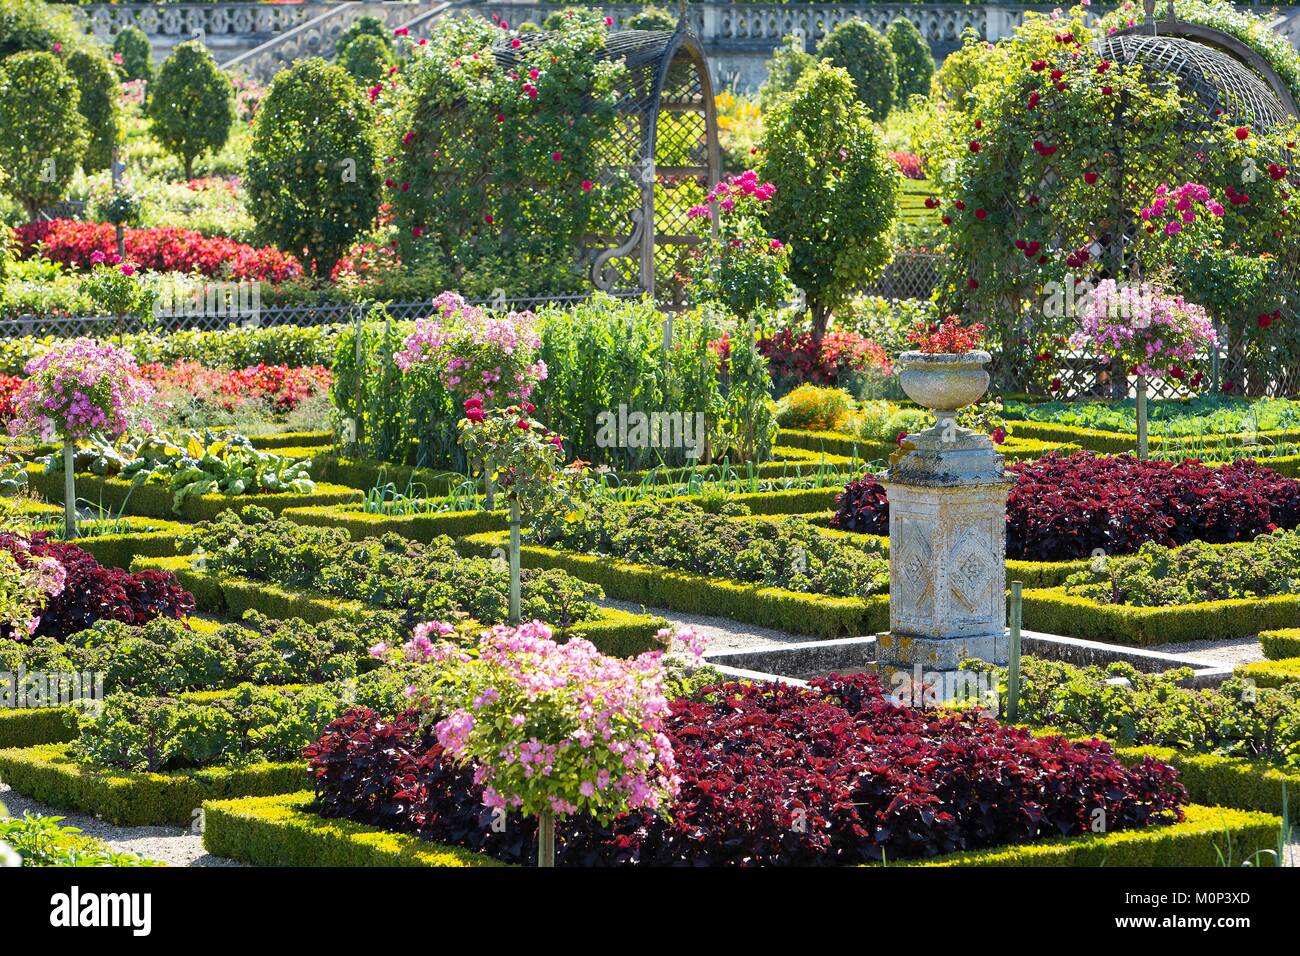 France,Indre et Loire,Loire Valley listed as World Heritage by UNESCO,Villandry,Chateau de Villandry gardens,property of Henri and Angelique Carvallo Stock Photo